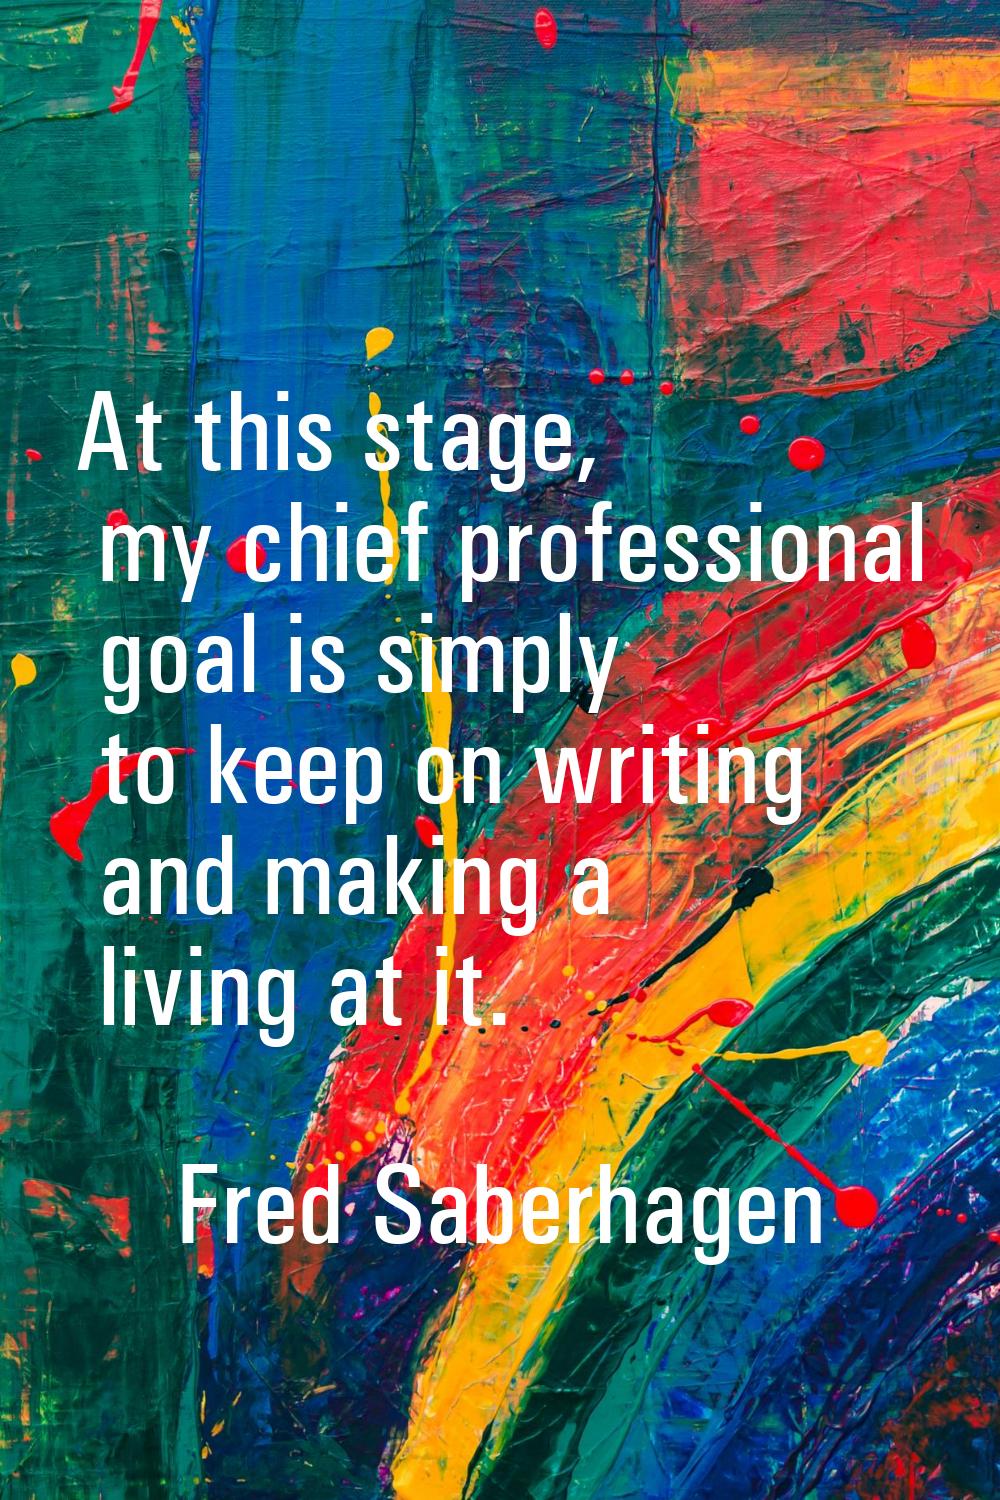 At this stage, my chief professional goal is simply to keep on writing and making a living at it.